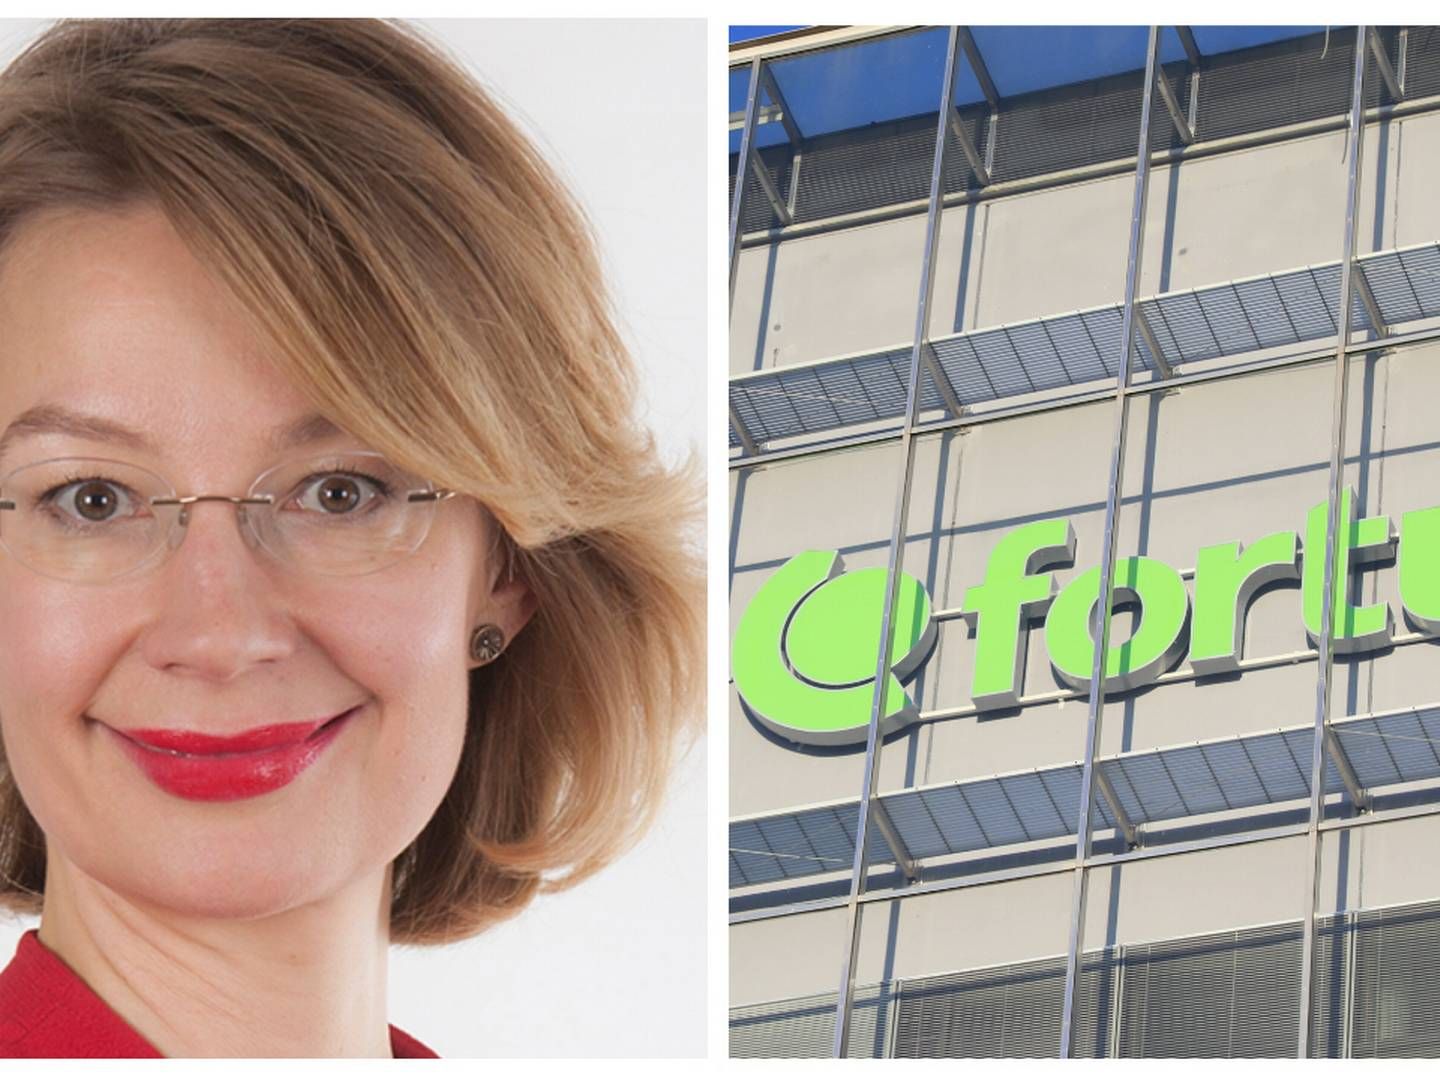 Finnish Minister of European Affairs and Ownership Steering, Tytti Tuppurainen, says Finland would not allow Germany to nationalize Fortum's subsidiary without compensation. | Photo: Eduskunta (l.) and Fortum (r.).